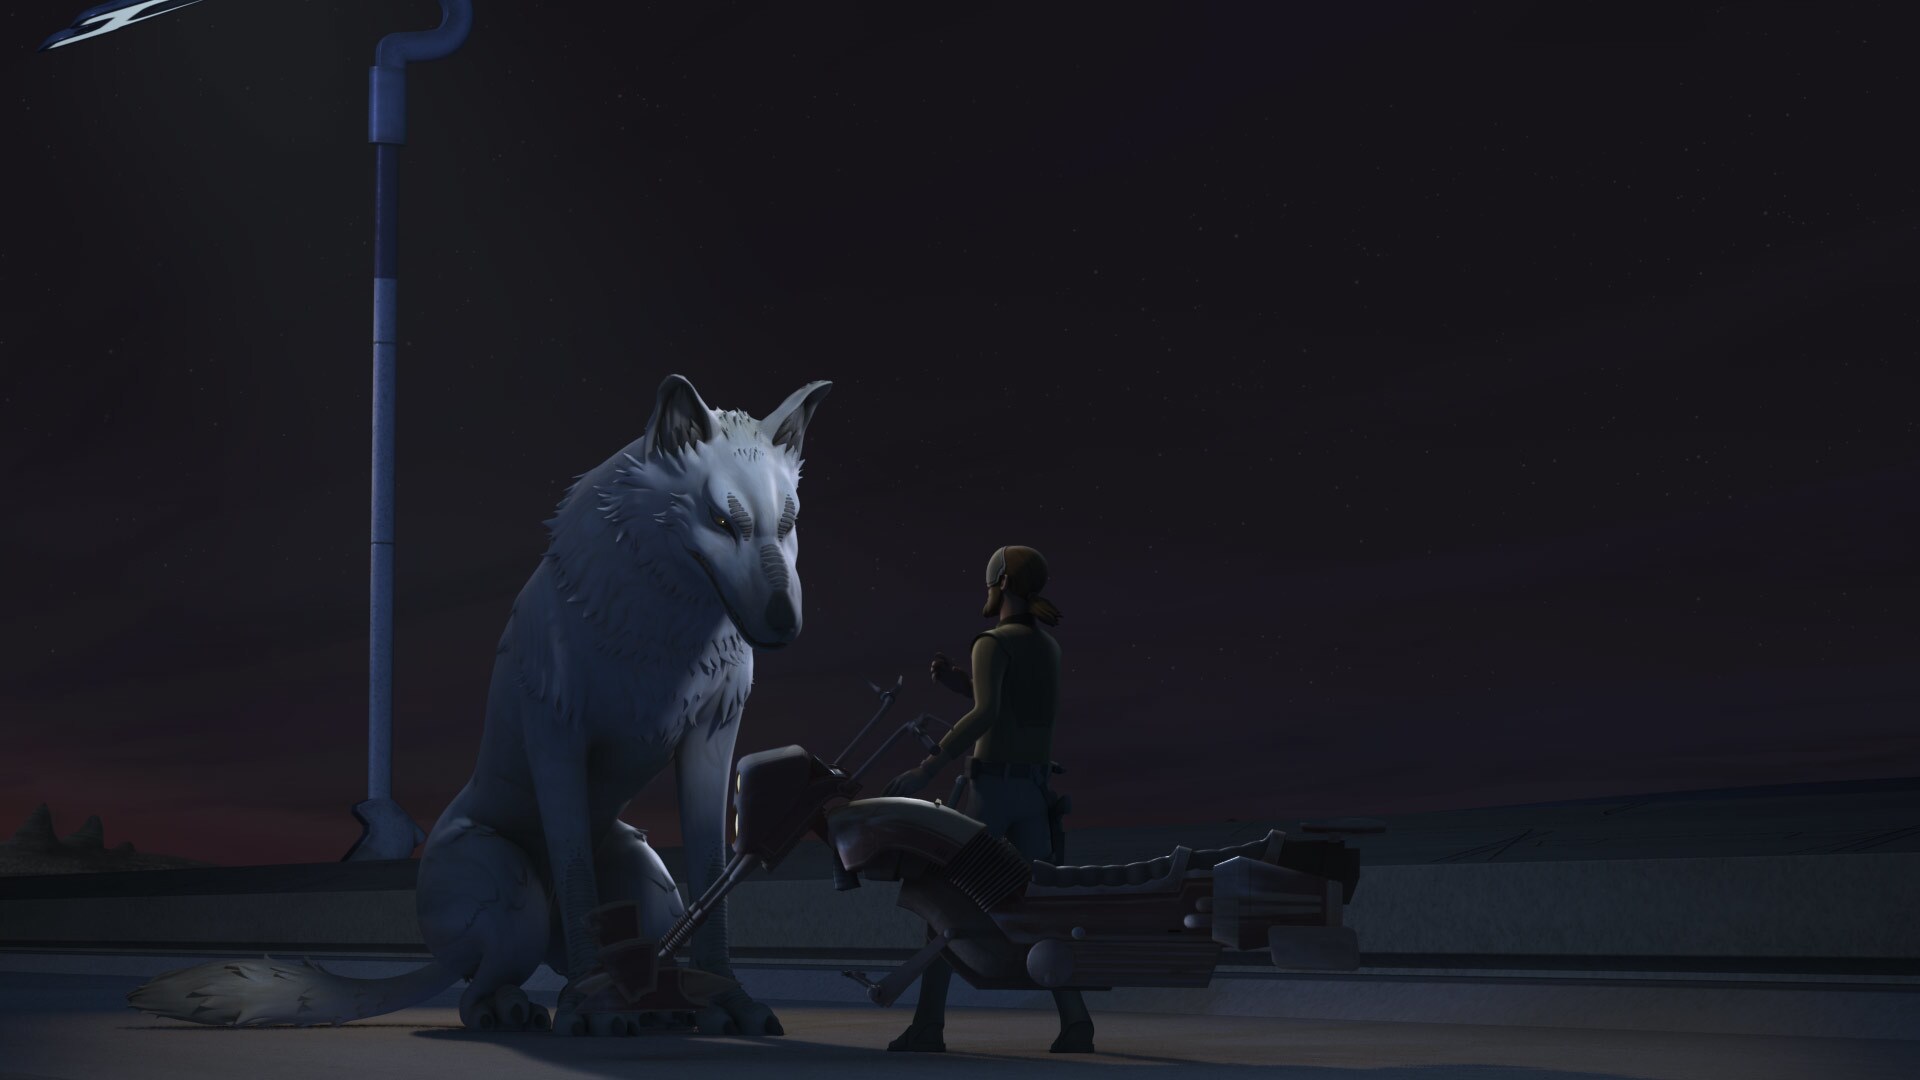 Kanan speeds over Lothal, when he suddenly encounters a Loth-wolf. "Dume," it says. "I understand...